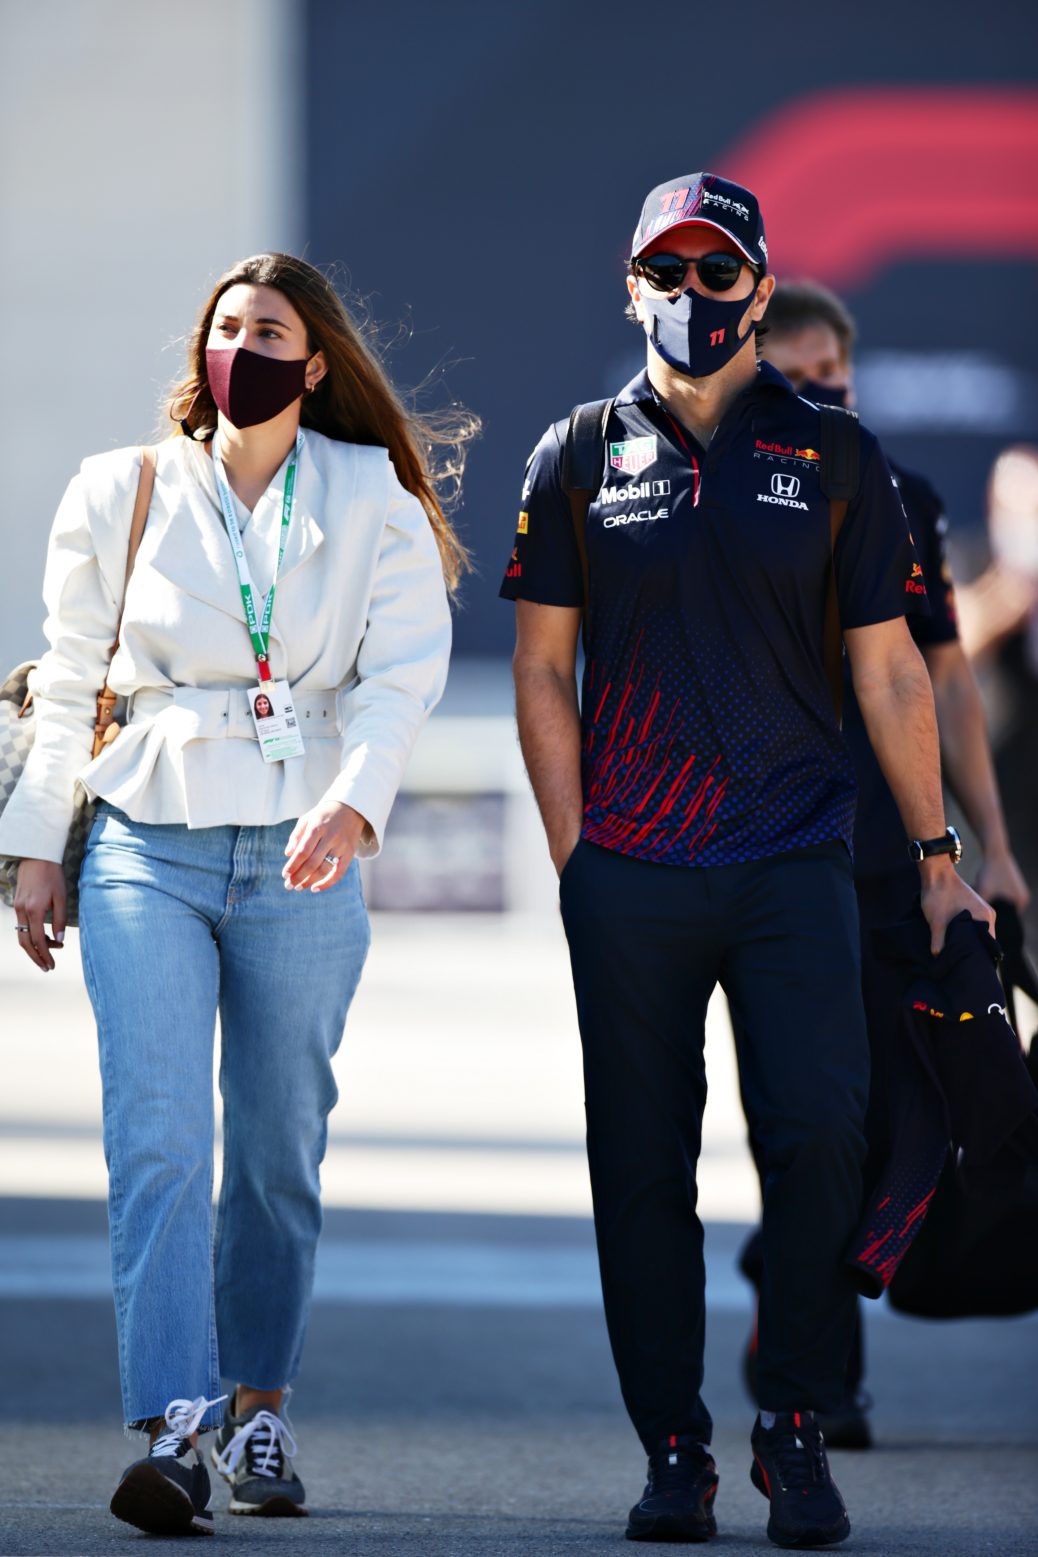 Sergio Perez caught dancing with mystery woman at 'very bad party